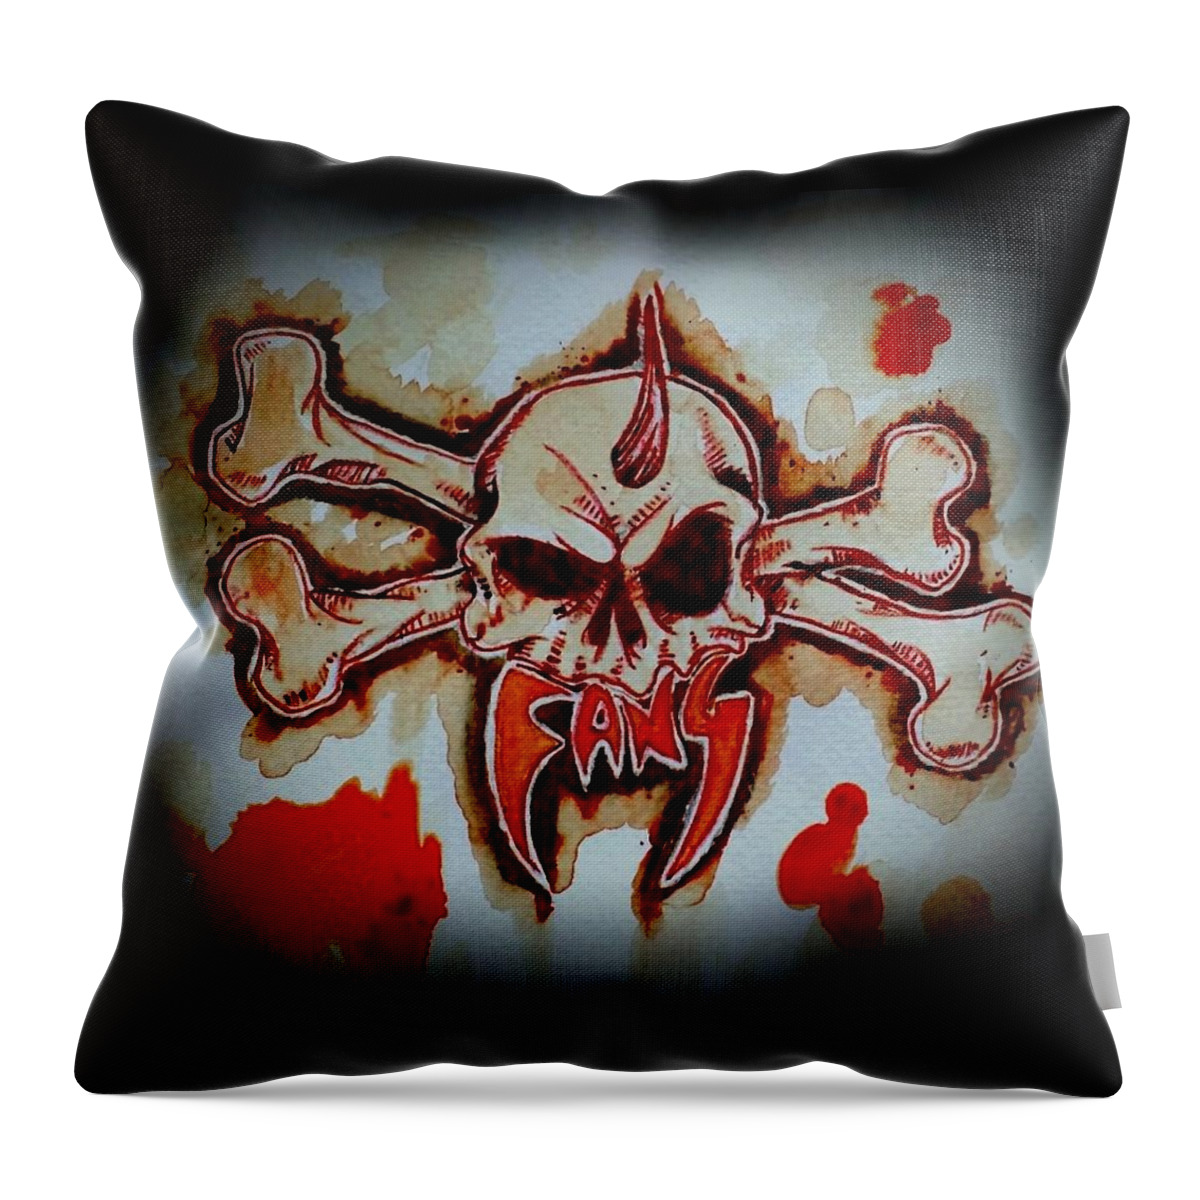  Throw Pillow featuring the painting Fang Logo by Ryan Almighty